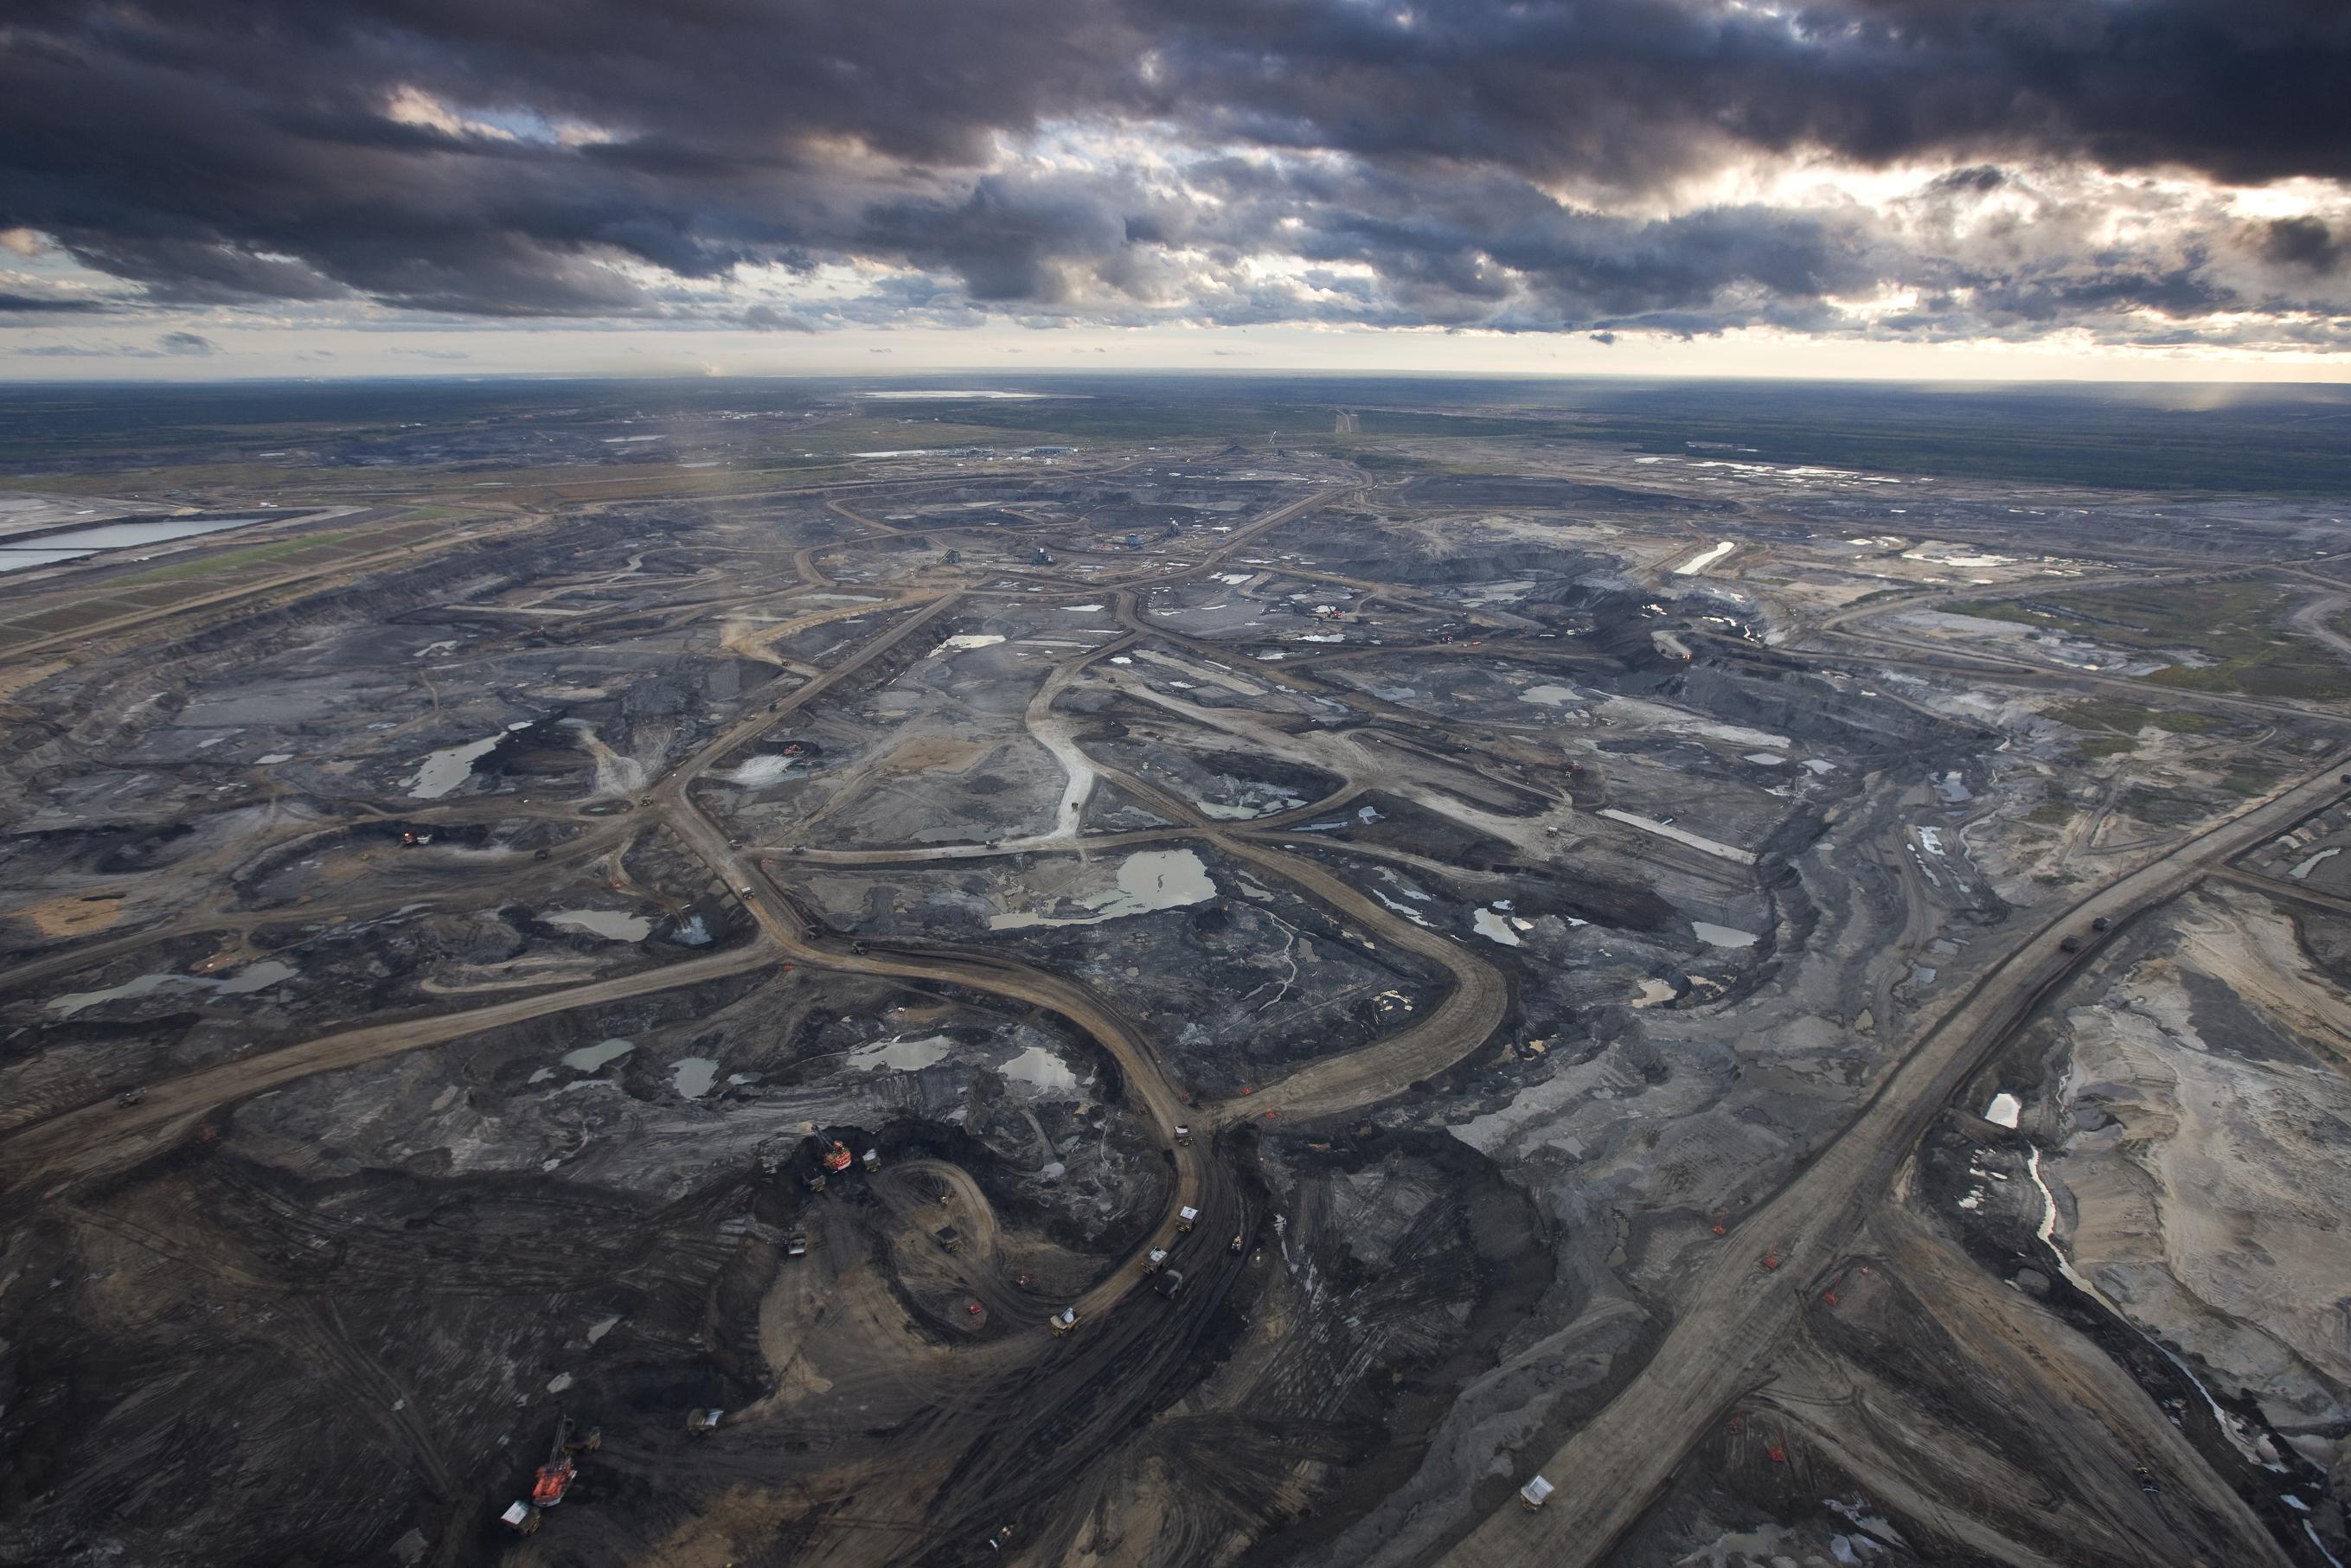 Syncrude Aurora Oil Sands Mine, north of Fort McMurray, Canada.